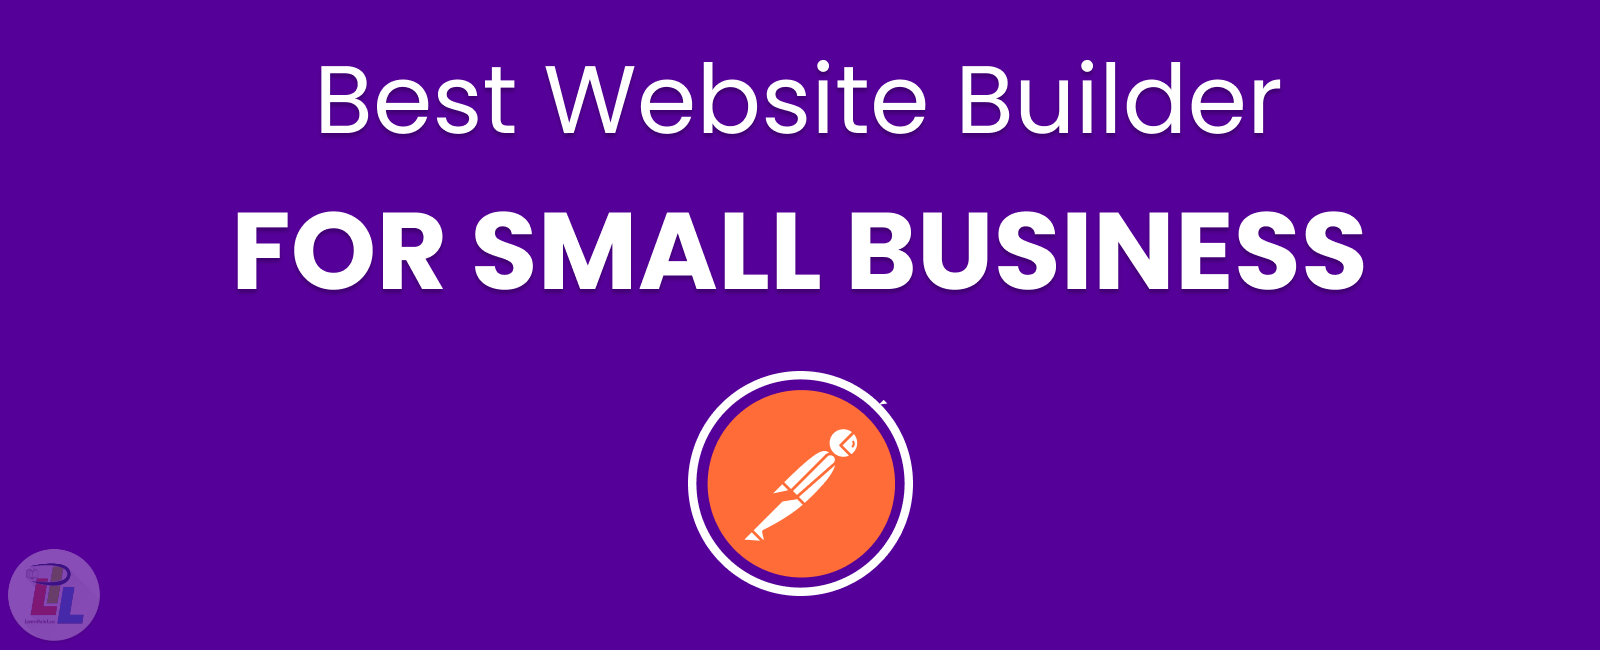 Best Website Builder for Small Business: Tips and Reviews